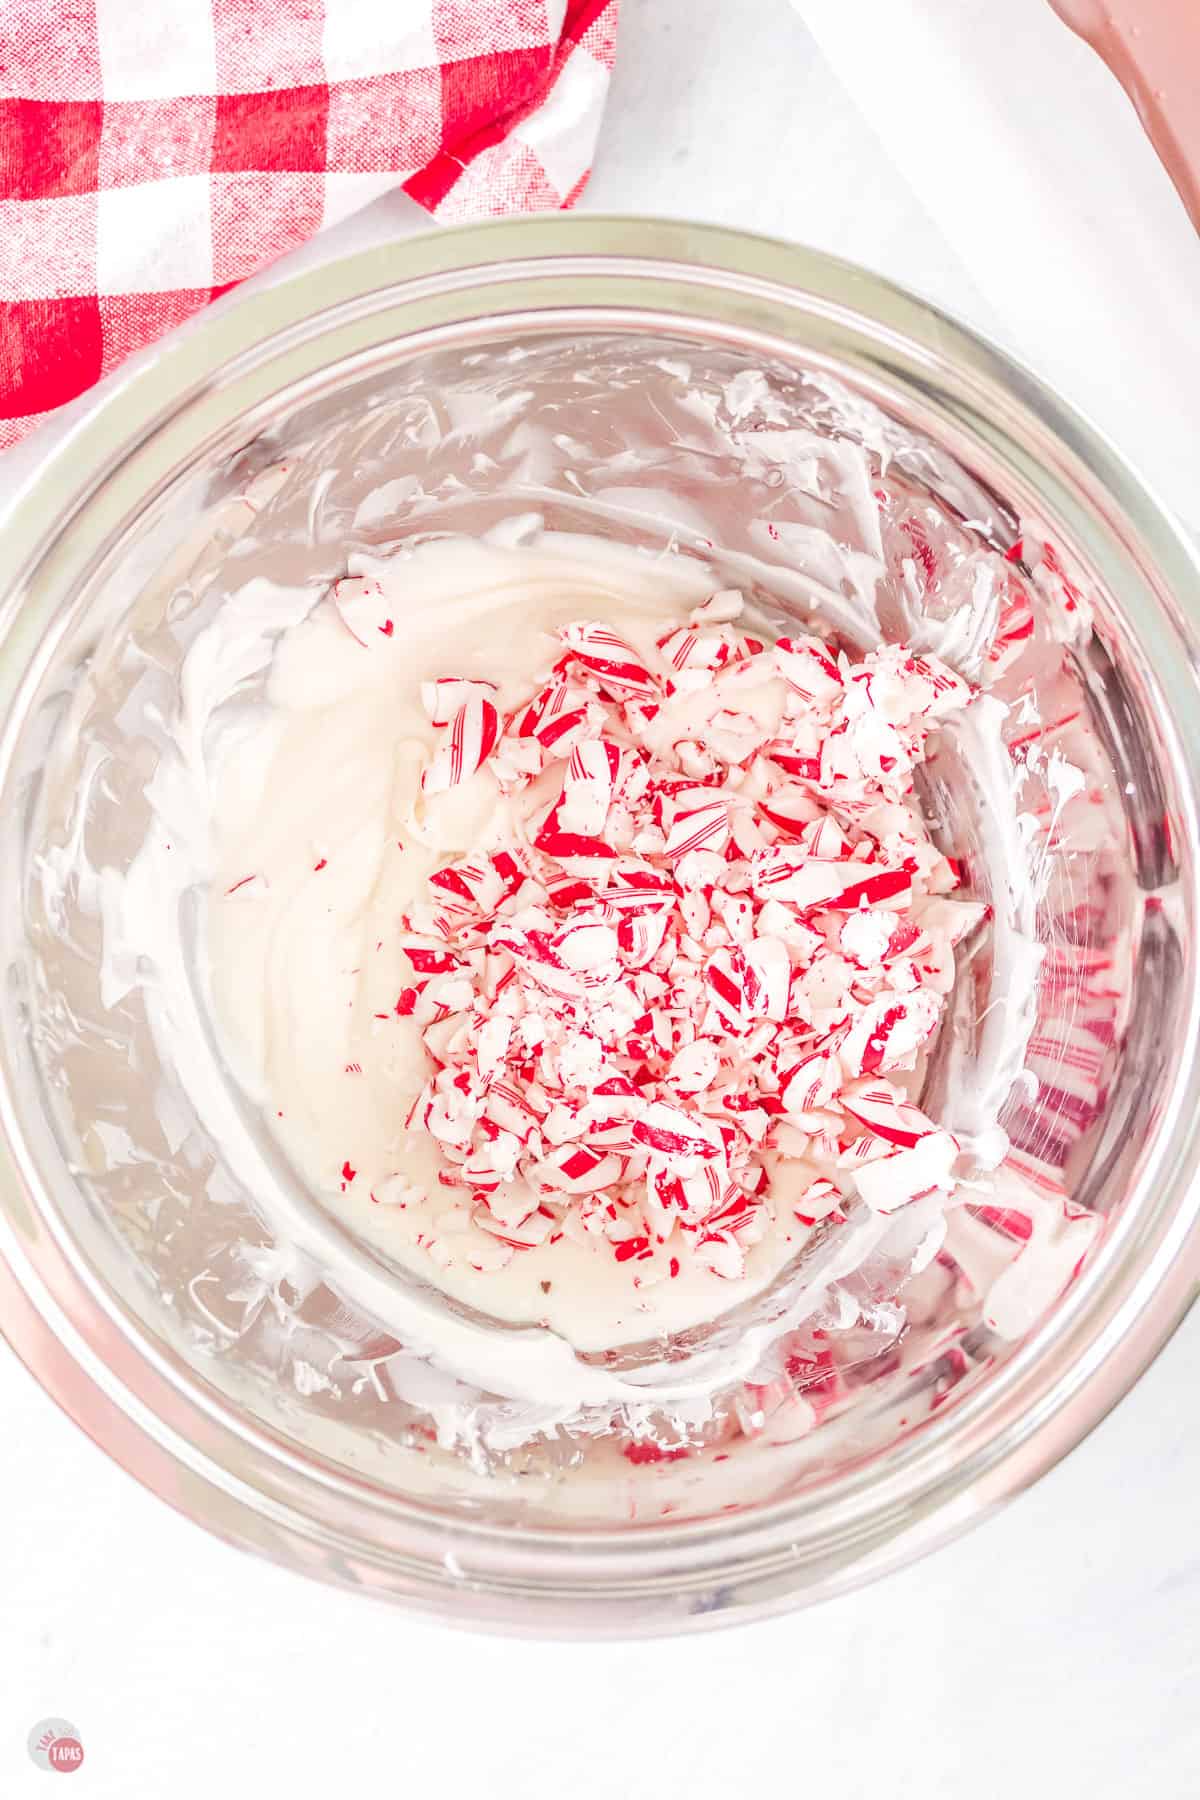 white chocolate and candy canes